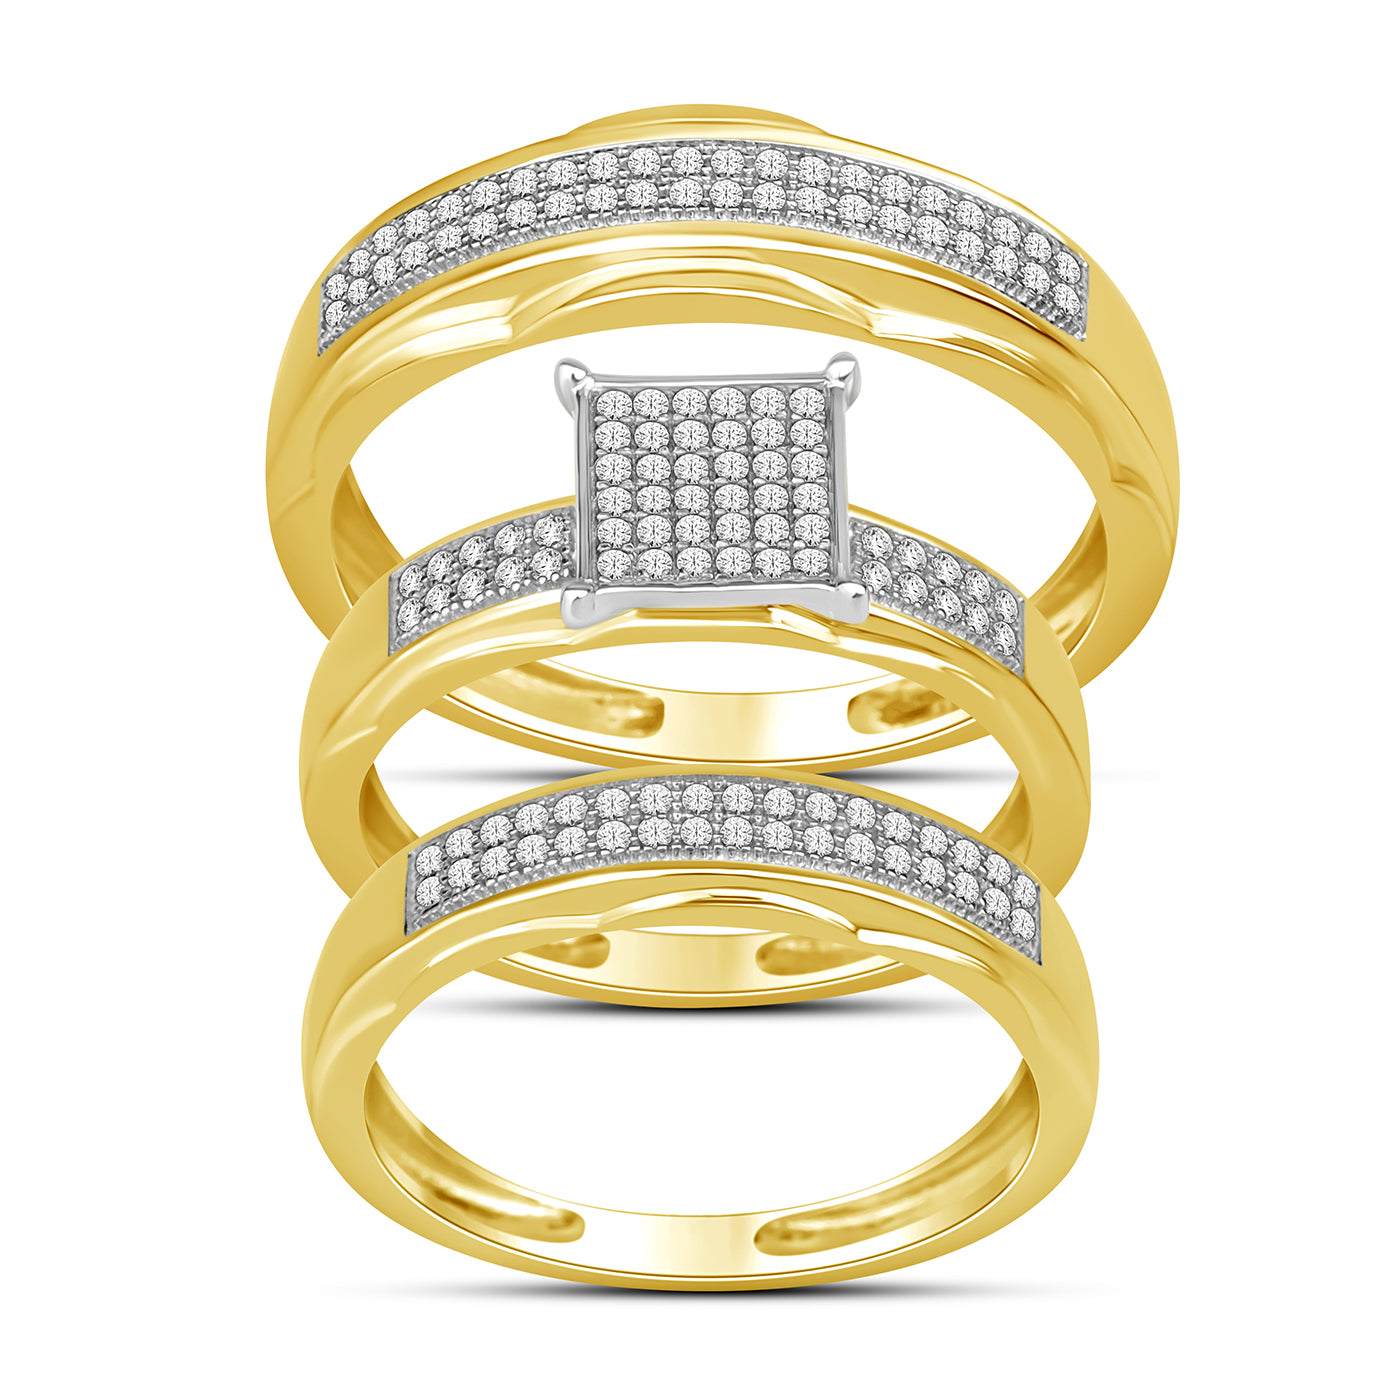 Bridal Set Micro Pave Engagement Ring With 0.40 Carat TW Of Diamonds In 10K Yellow Gold